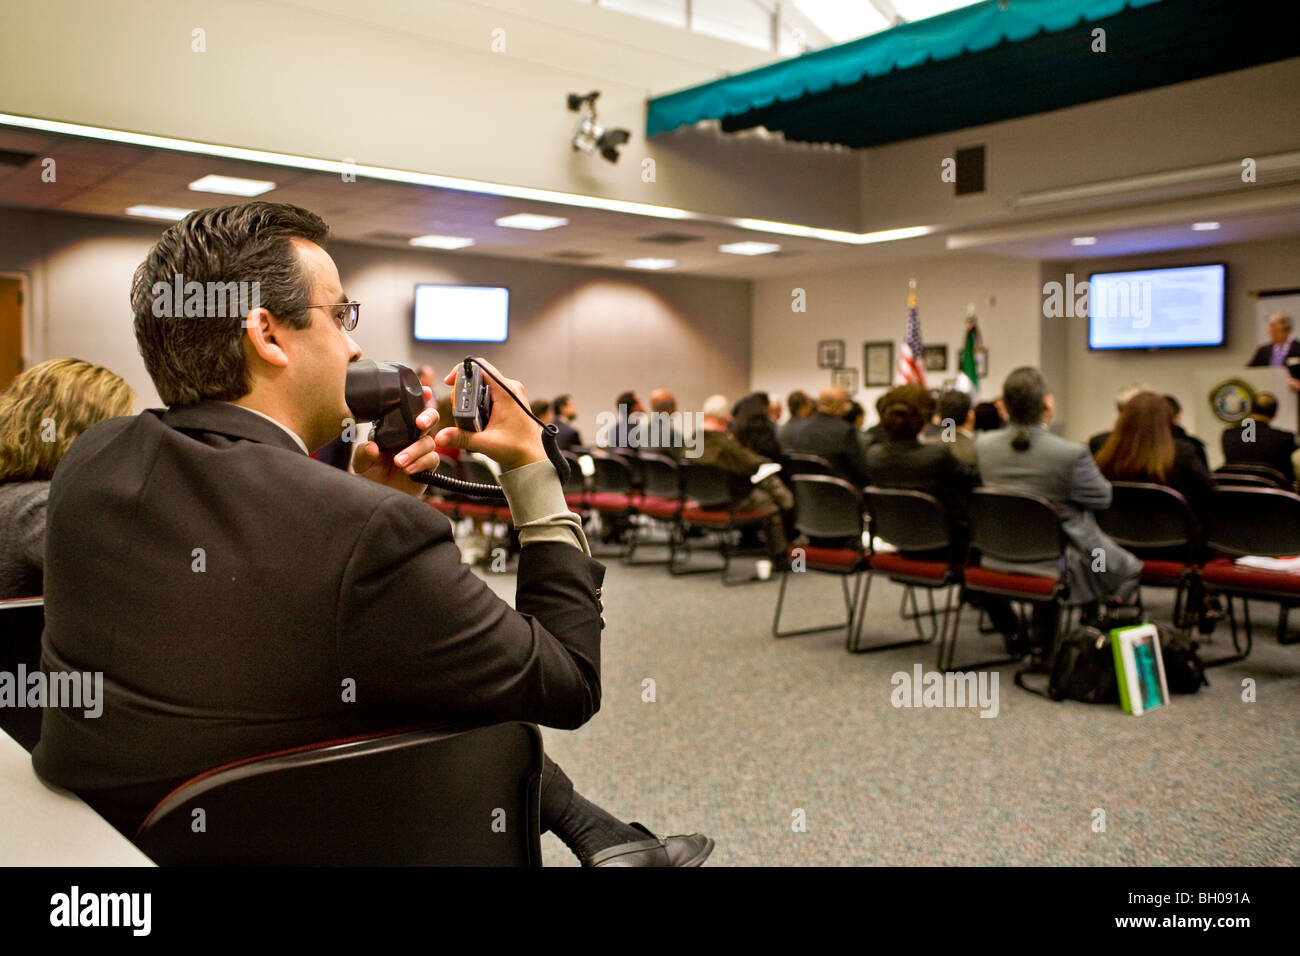 Using a microphone and cordless transmitter, a Hispanic simultaneous translator assists Spanish-speaking conference delegates. Stock Photo